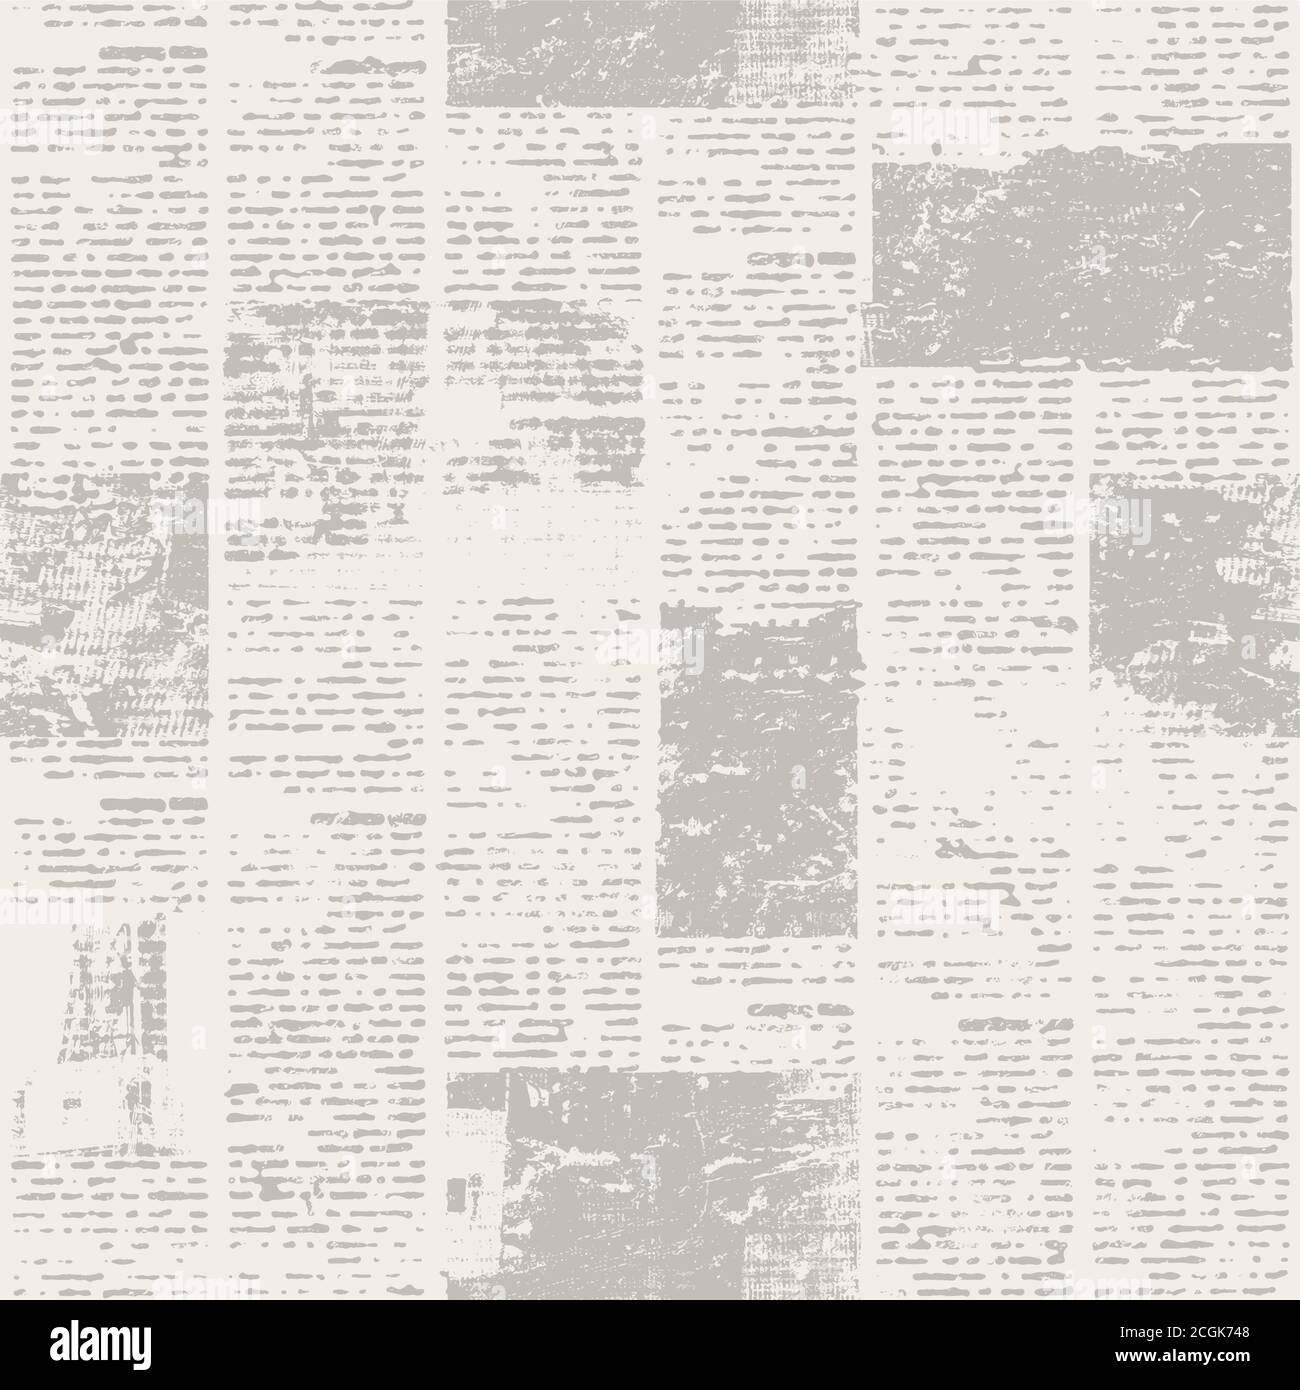 Newspaper Texture Paper With Old Unreadable Text And Images Vintage Blurred News Pattern Square Background Textured Page Sepia Beige Collage Print Stock Vector Image Art Alamy